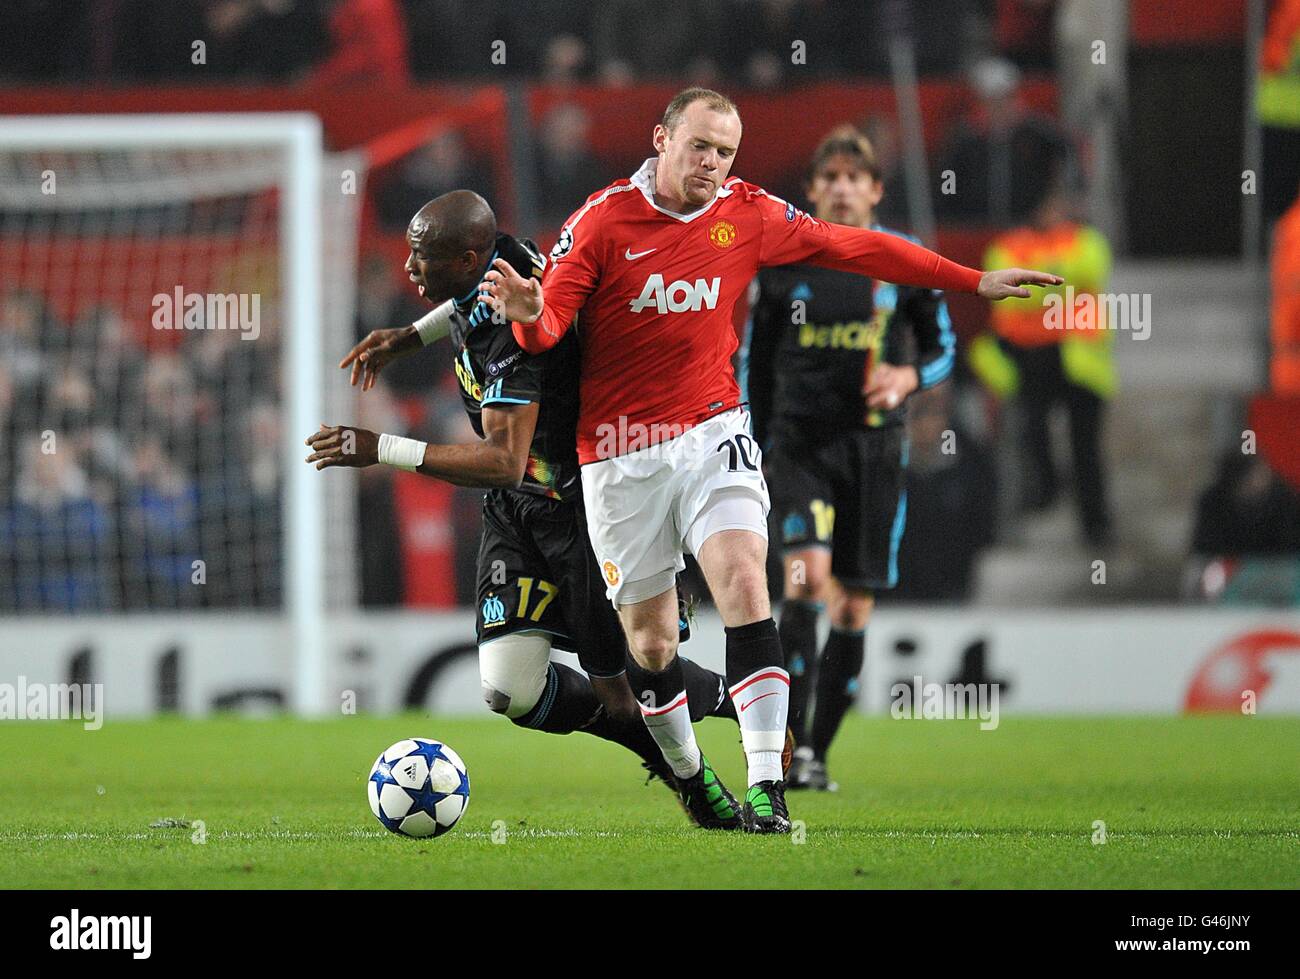 Soccer - UEFA Champions League - Round of Sixteen - Second Leg - Manchester United v Olympique de Marseille - Old Trafford. Manchester United's Wayne Rooney (right) pushes past Marseille's Stephane M'bia Etoundi (left) Stock Photo